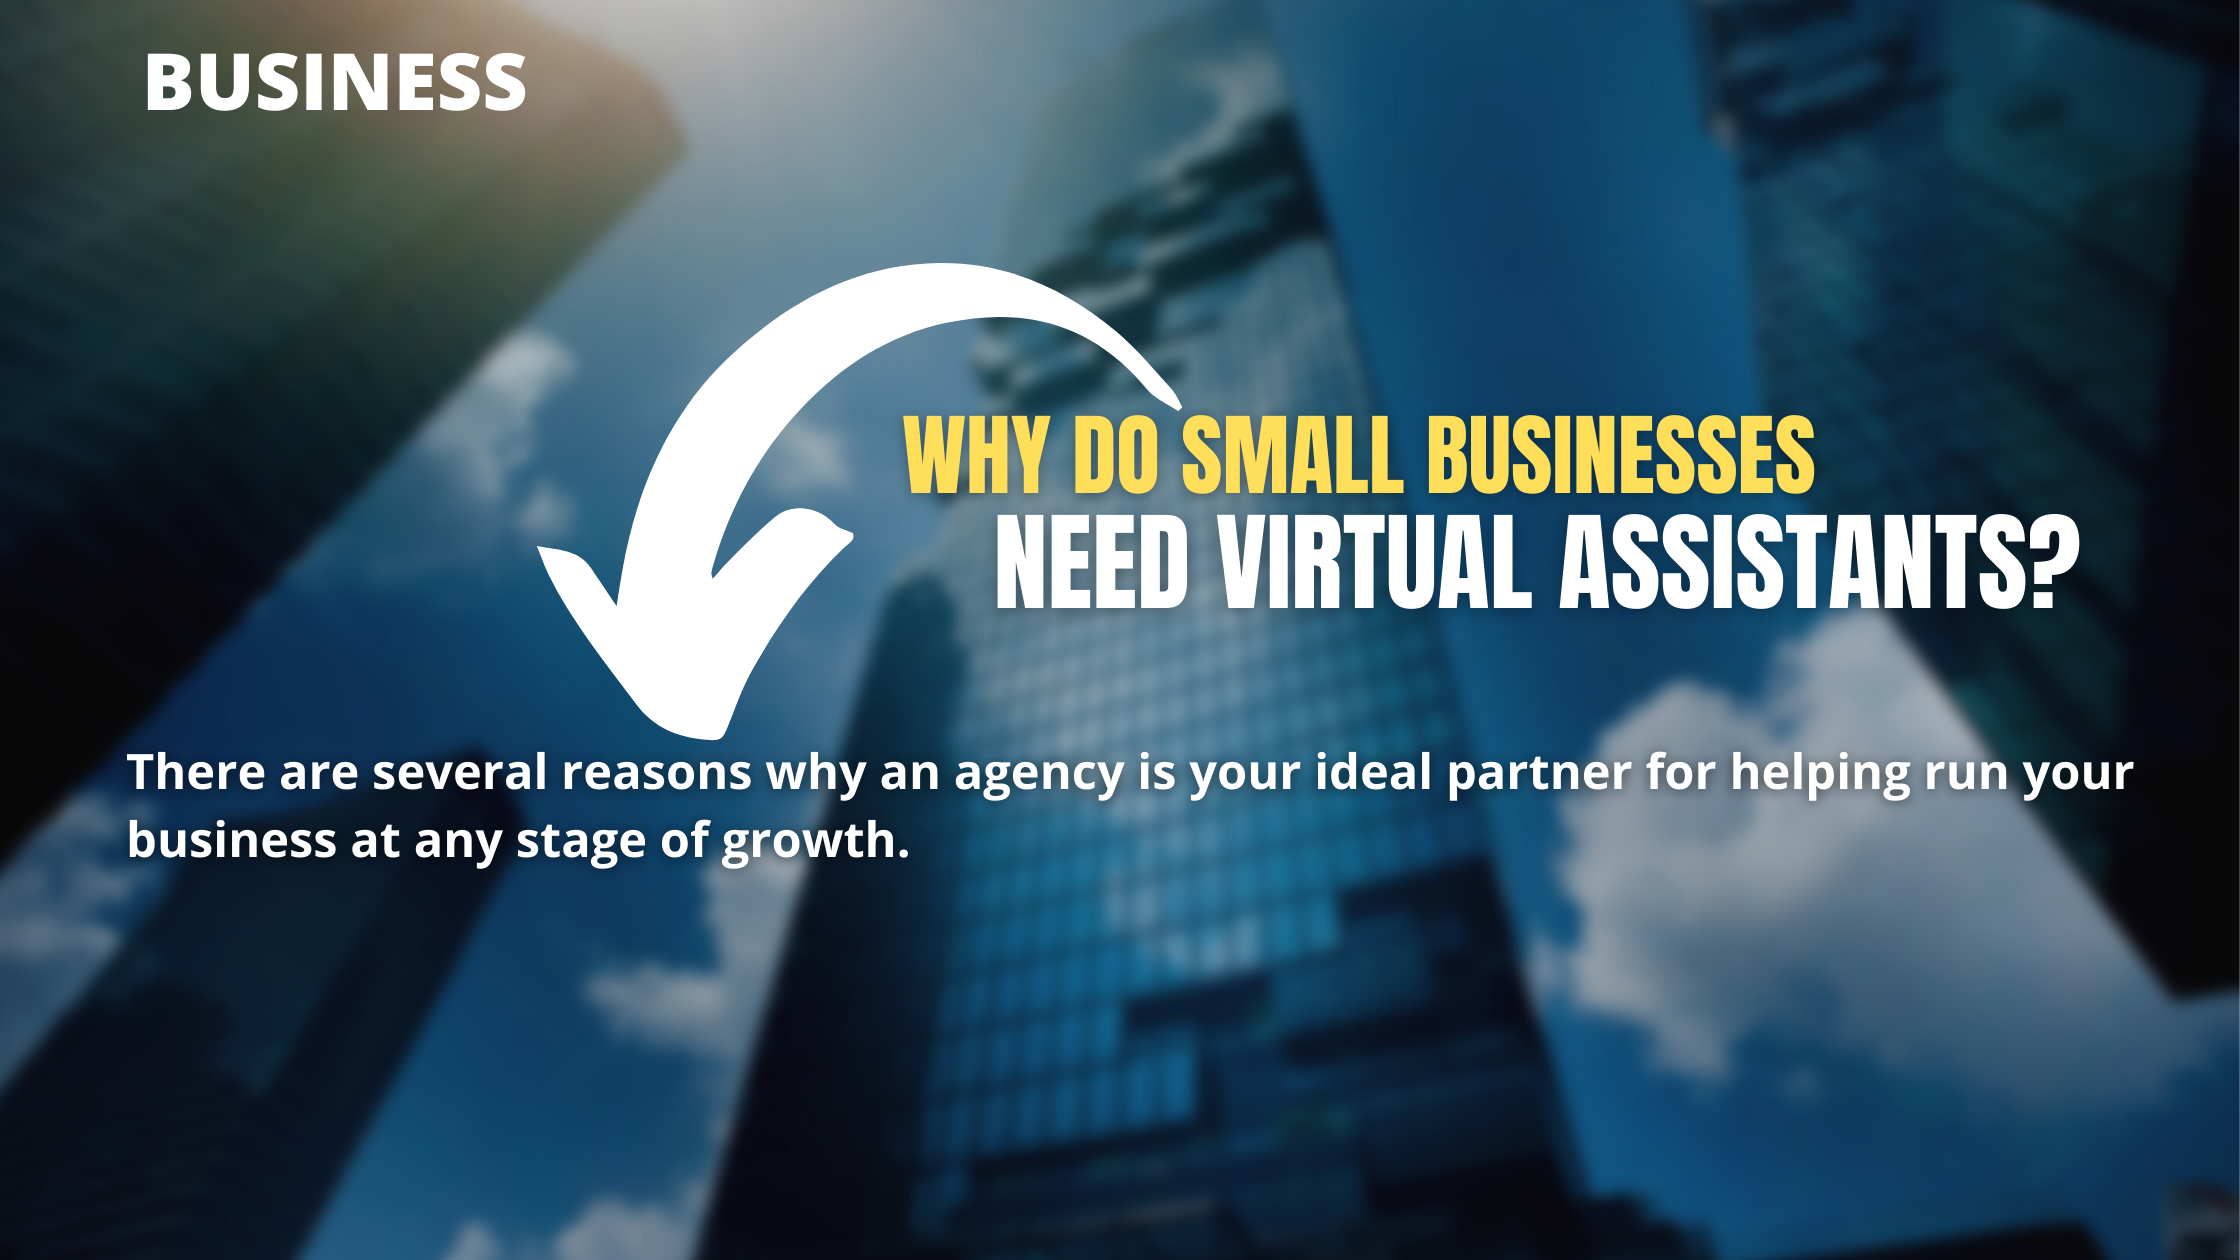 Why Do Small Businesses Need Virtual Assistants?